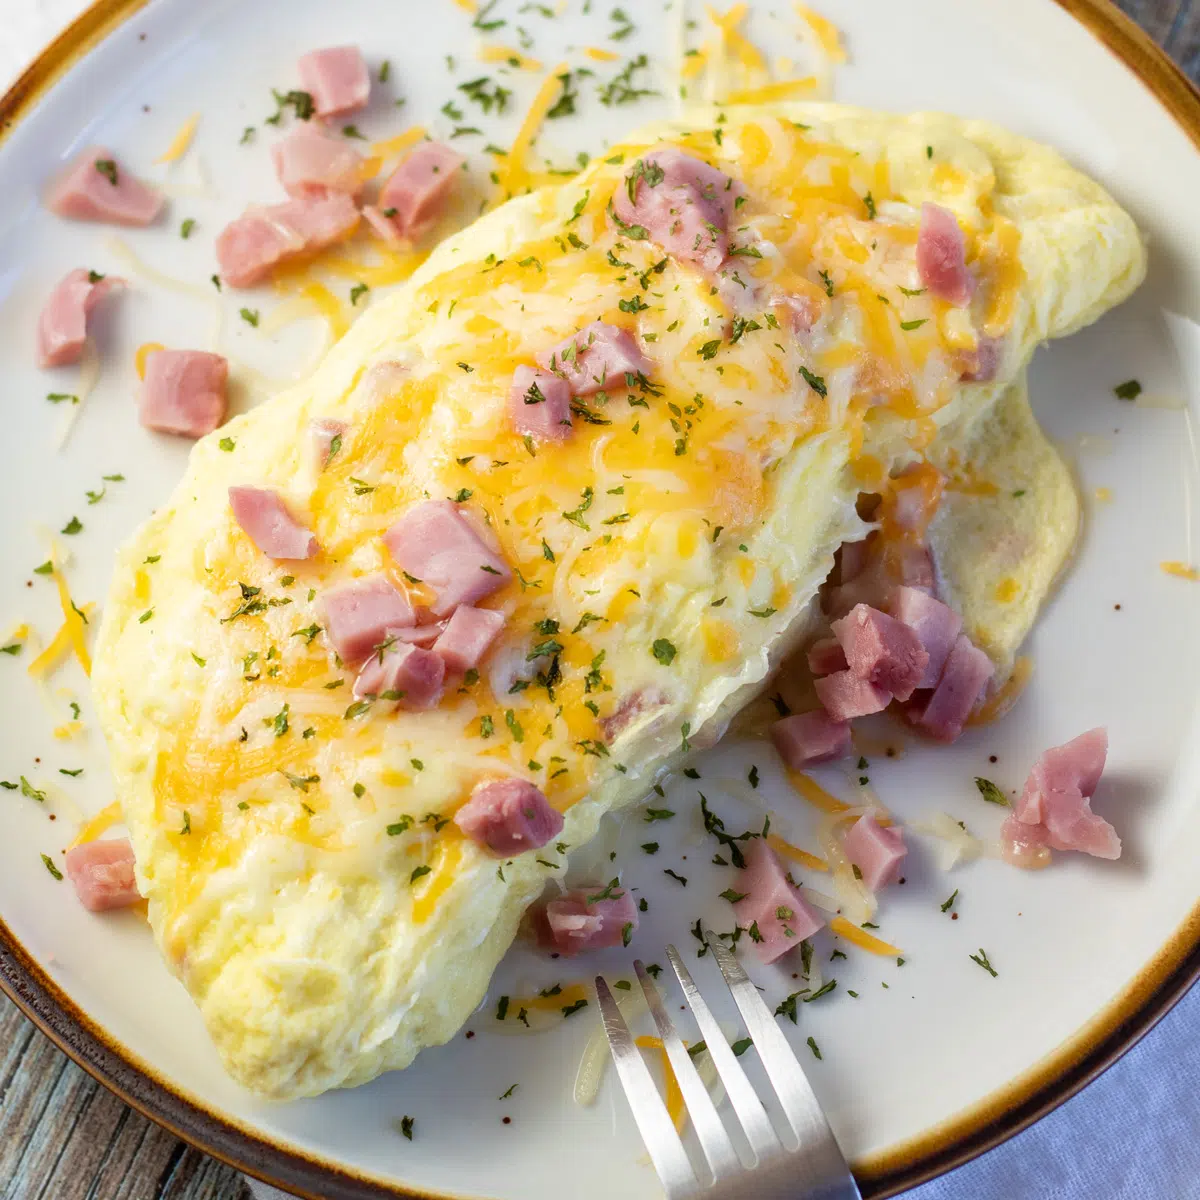 Square image of an omelet on a plate with ham & cheese.